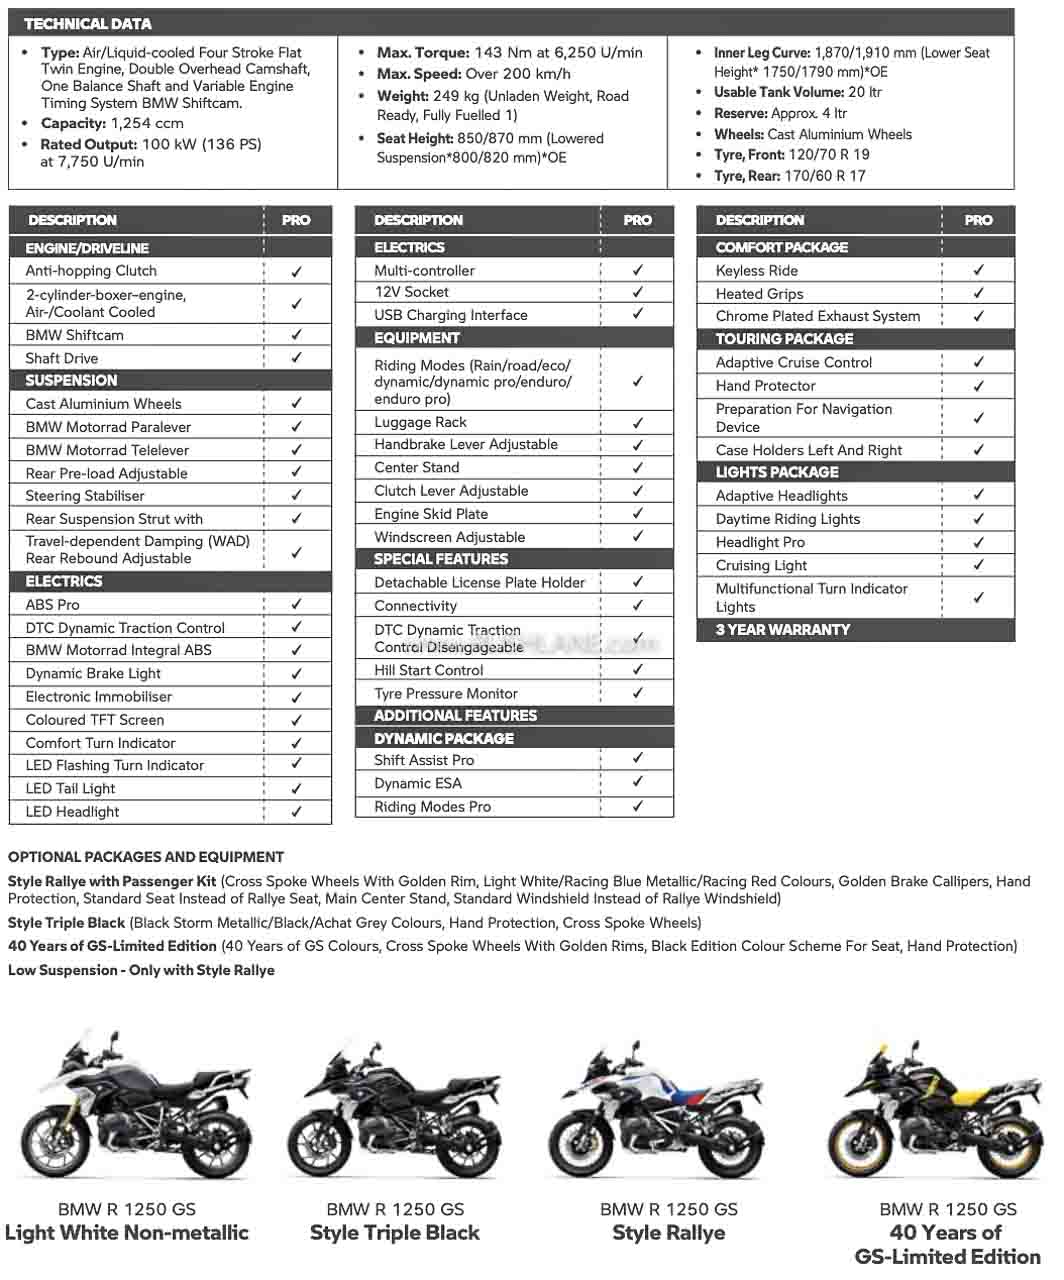 21 Bmw R 1250 Gs Adventure India Launch Price Rs 45 L Onwards